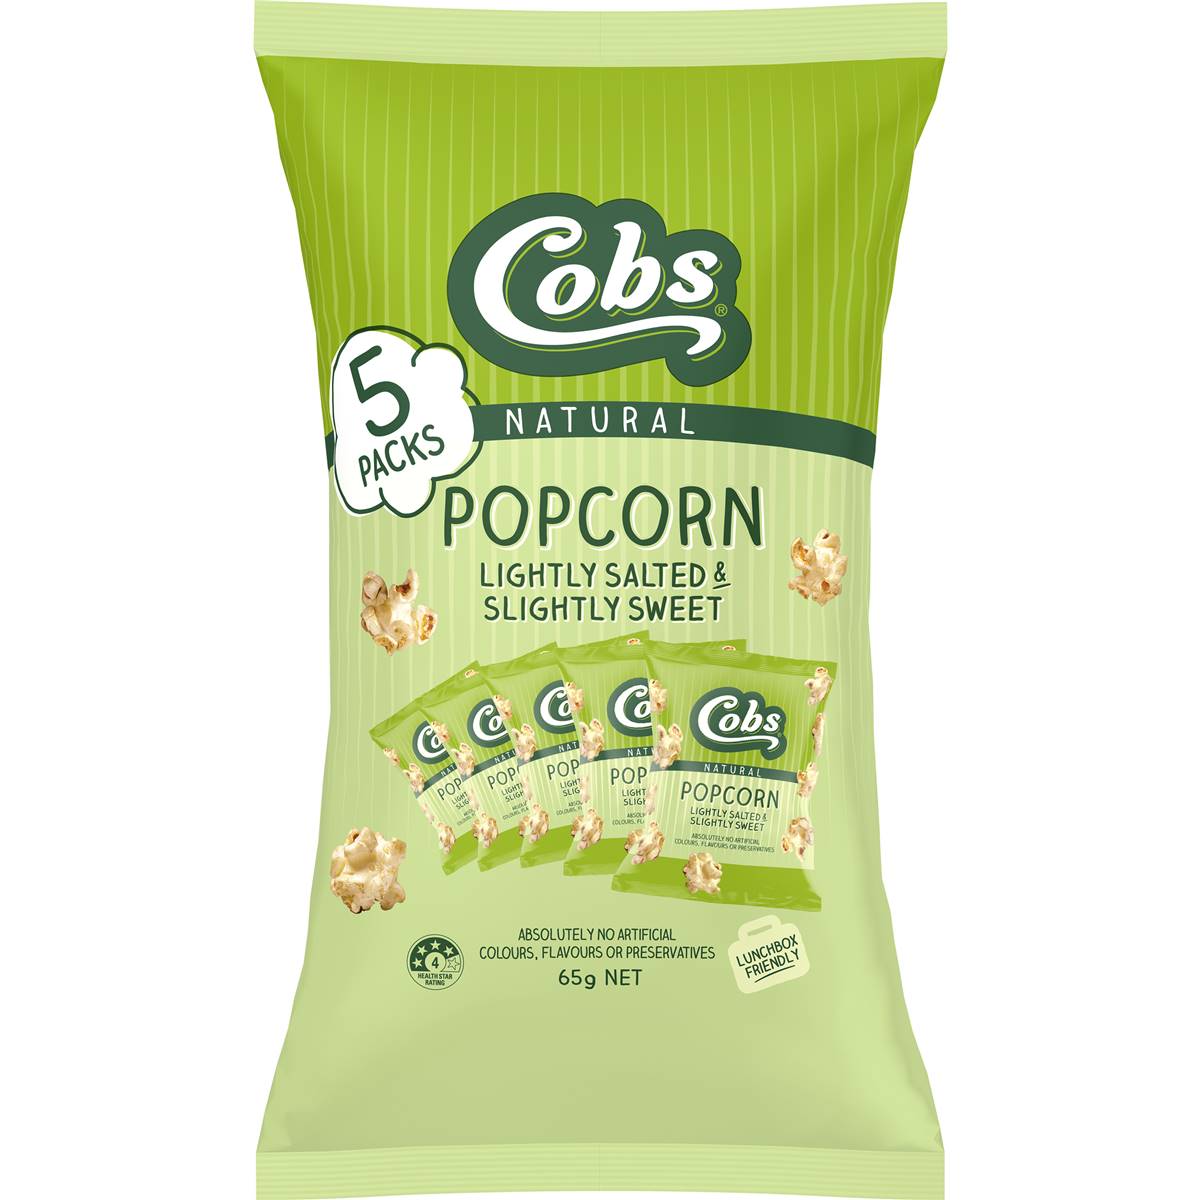 Calories in Cobs Popcorn Lightly Salted Slightly Sweet Gluten Free